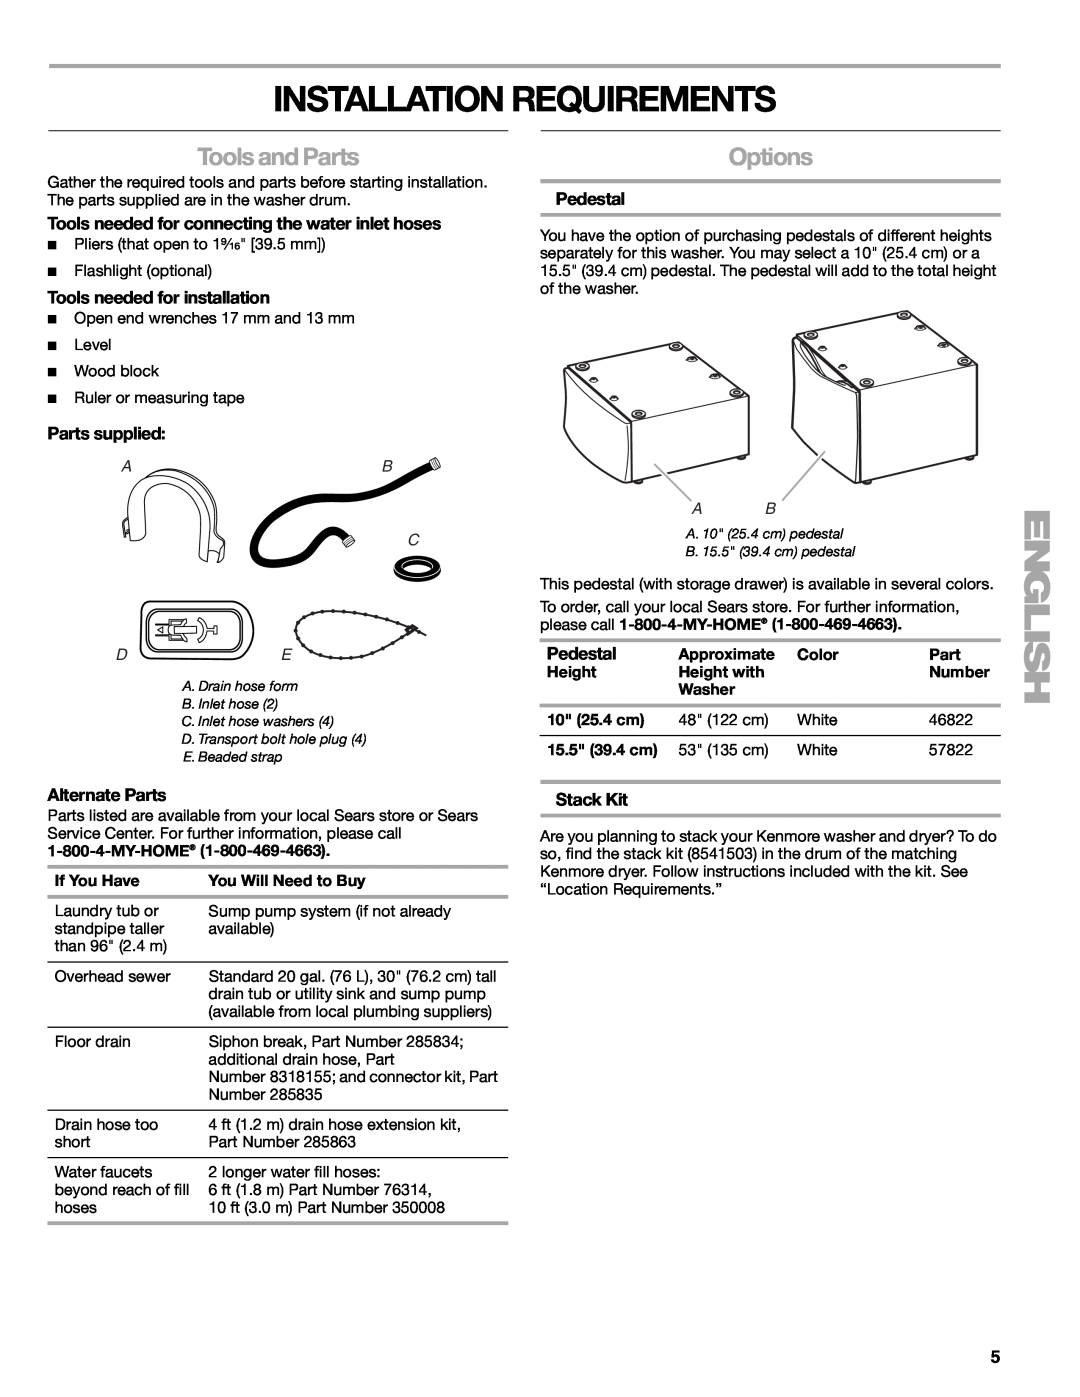 Kenmore W10133487A Installation Requirements, Tools and Parts, Options, Tools needed for connecting the water inlet hoses 